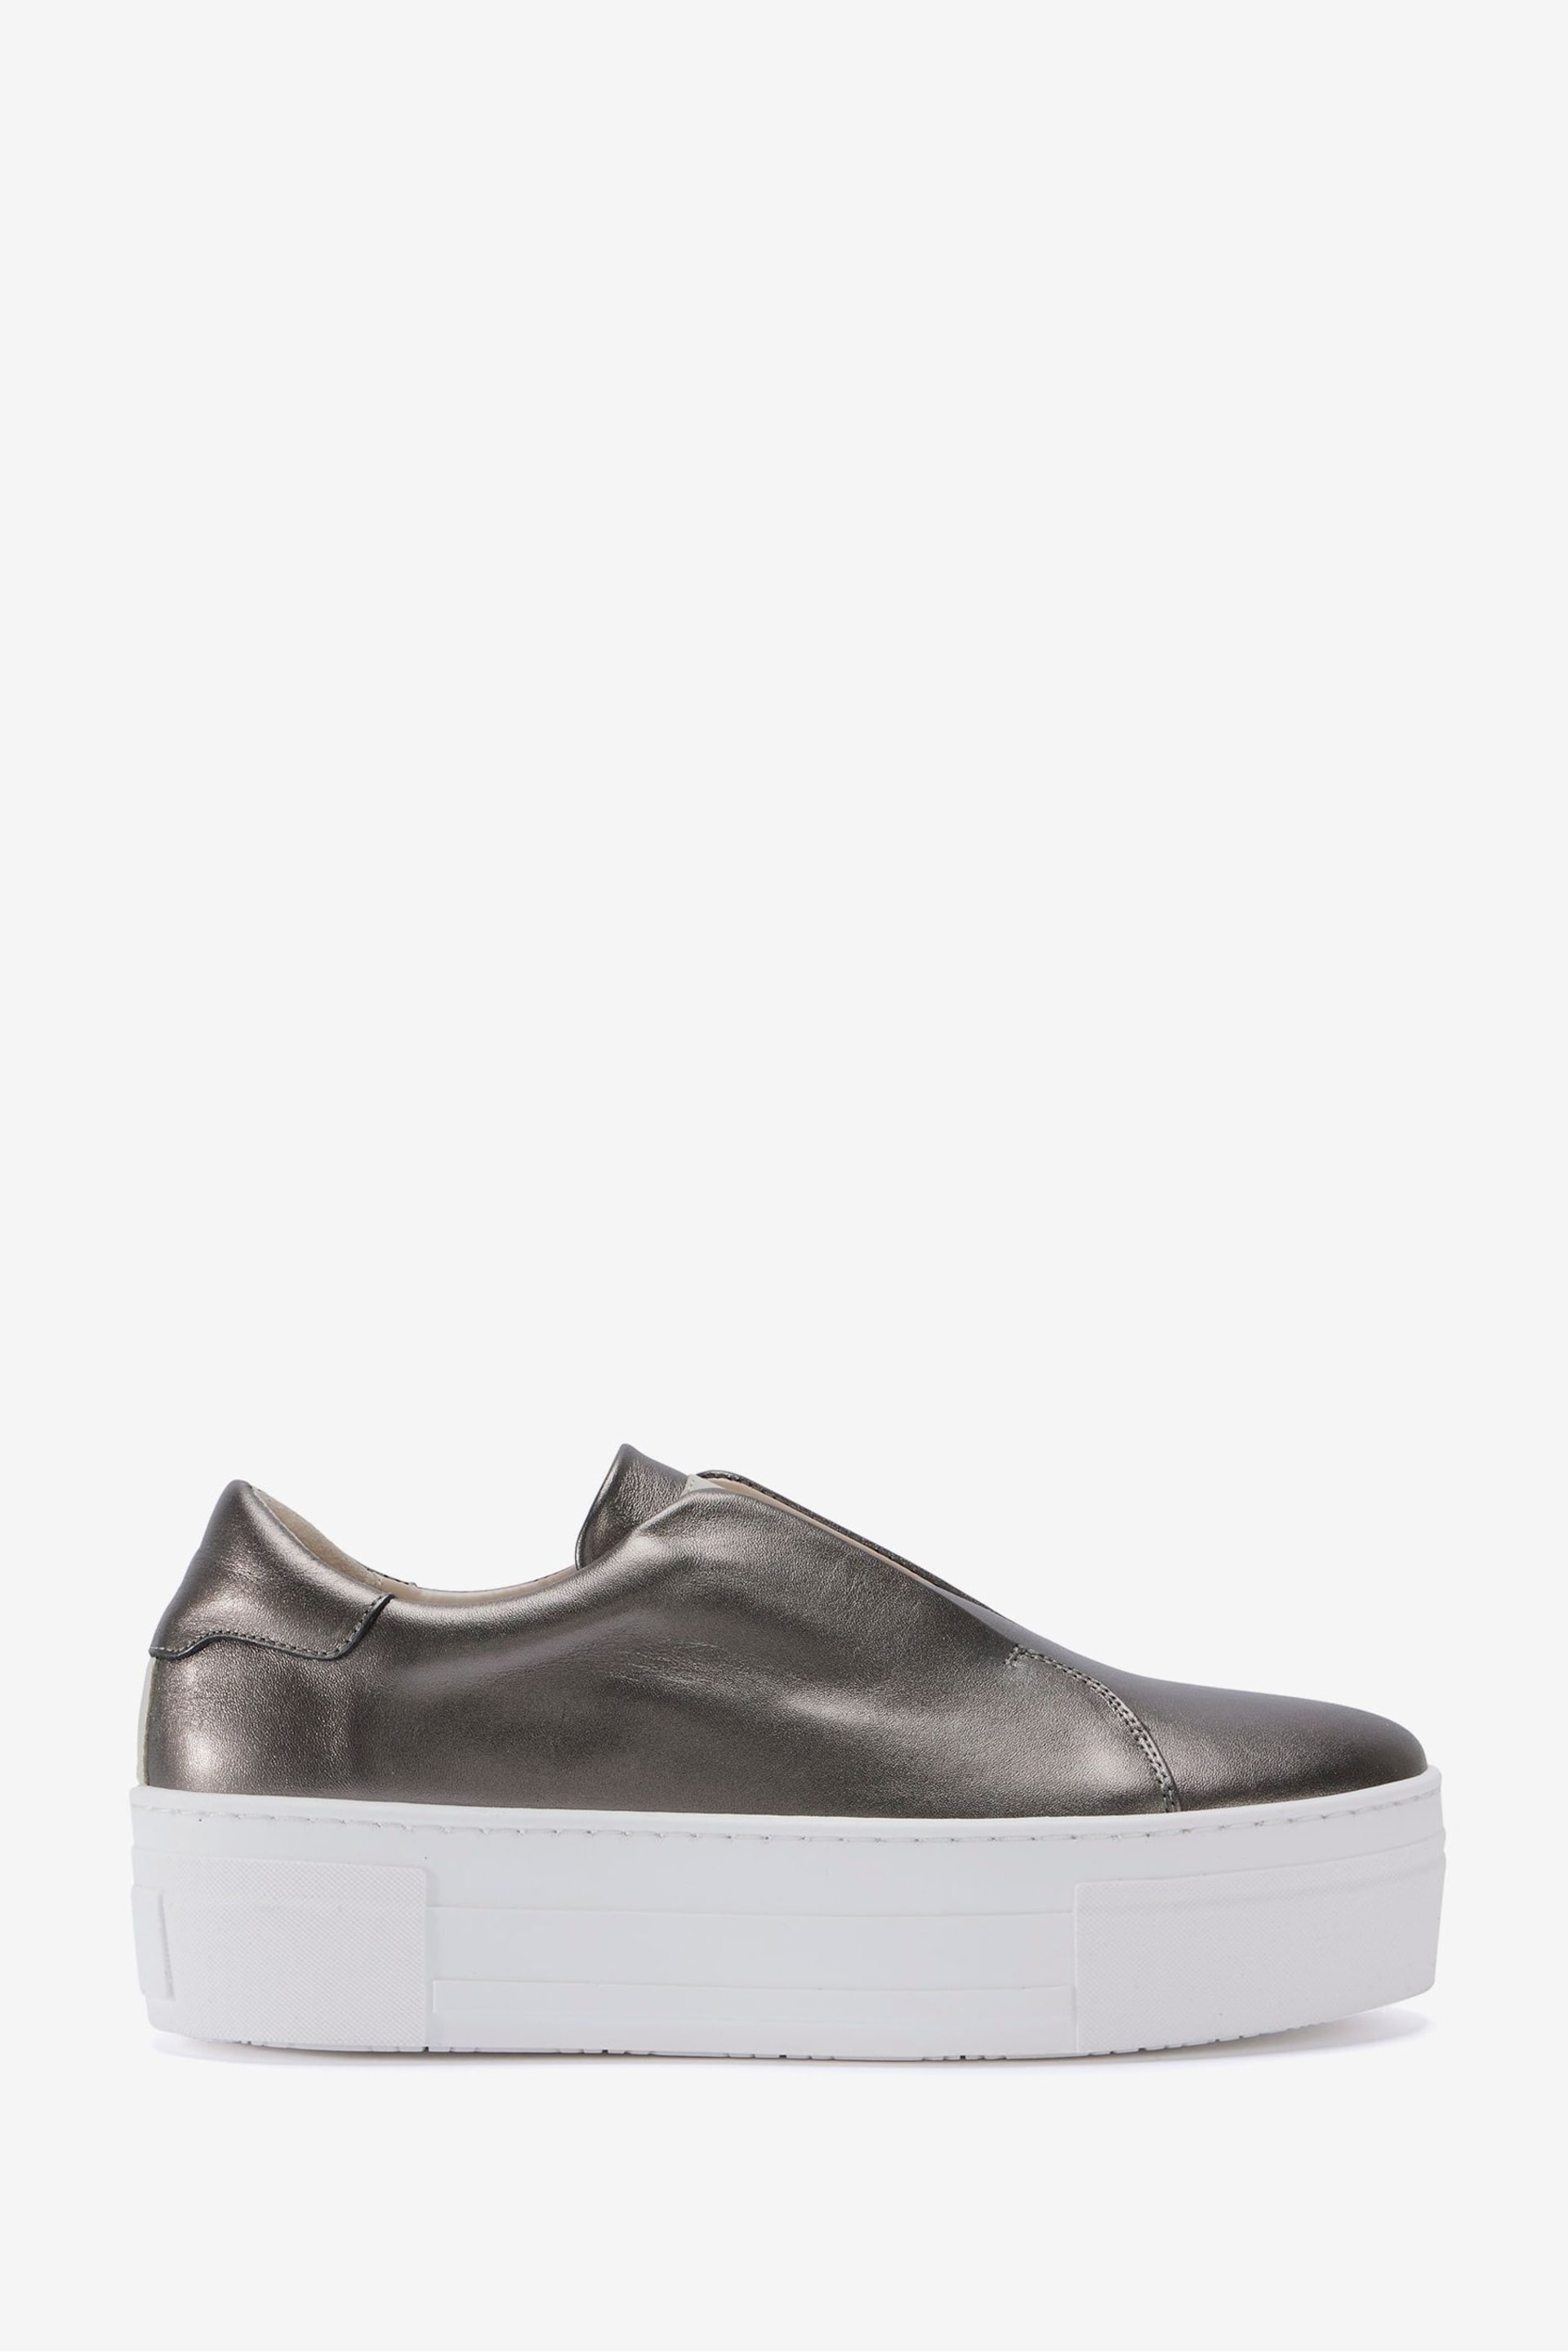 Mint Velvet Silver Striped Ellie Trainers - Image 1 of 3